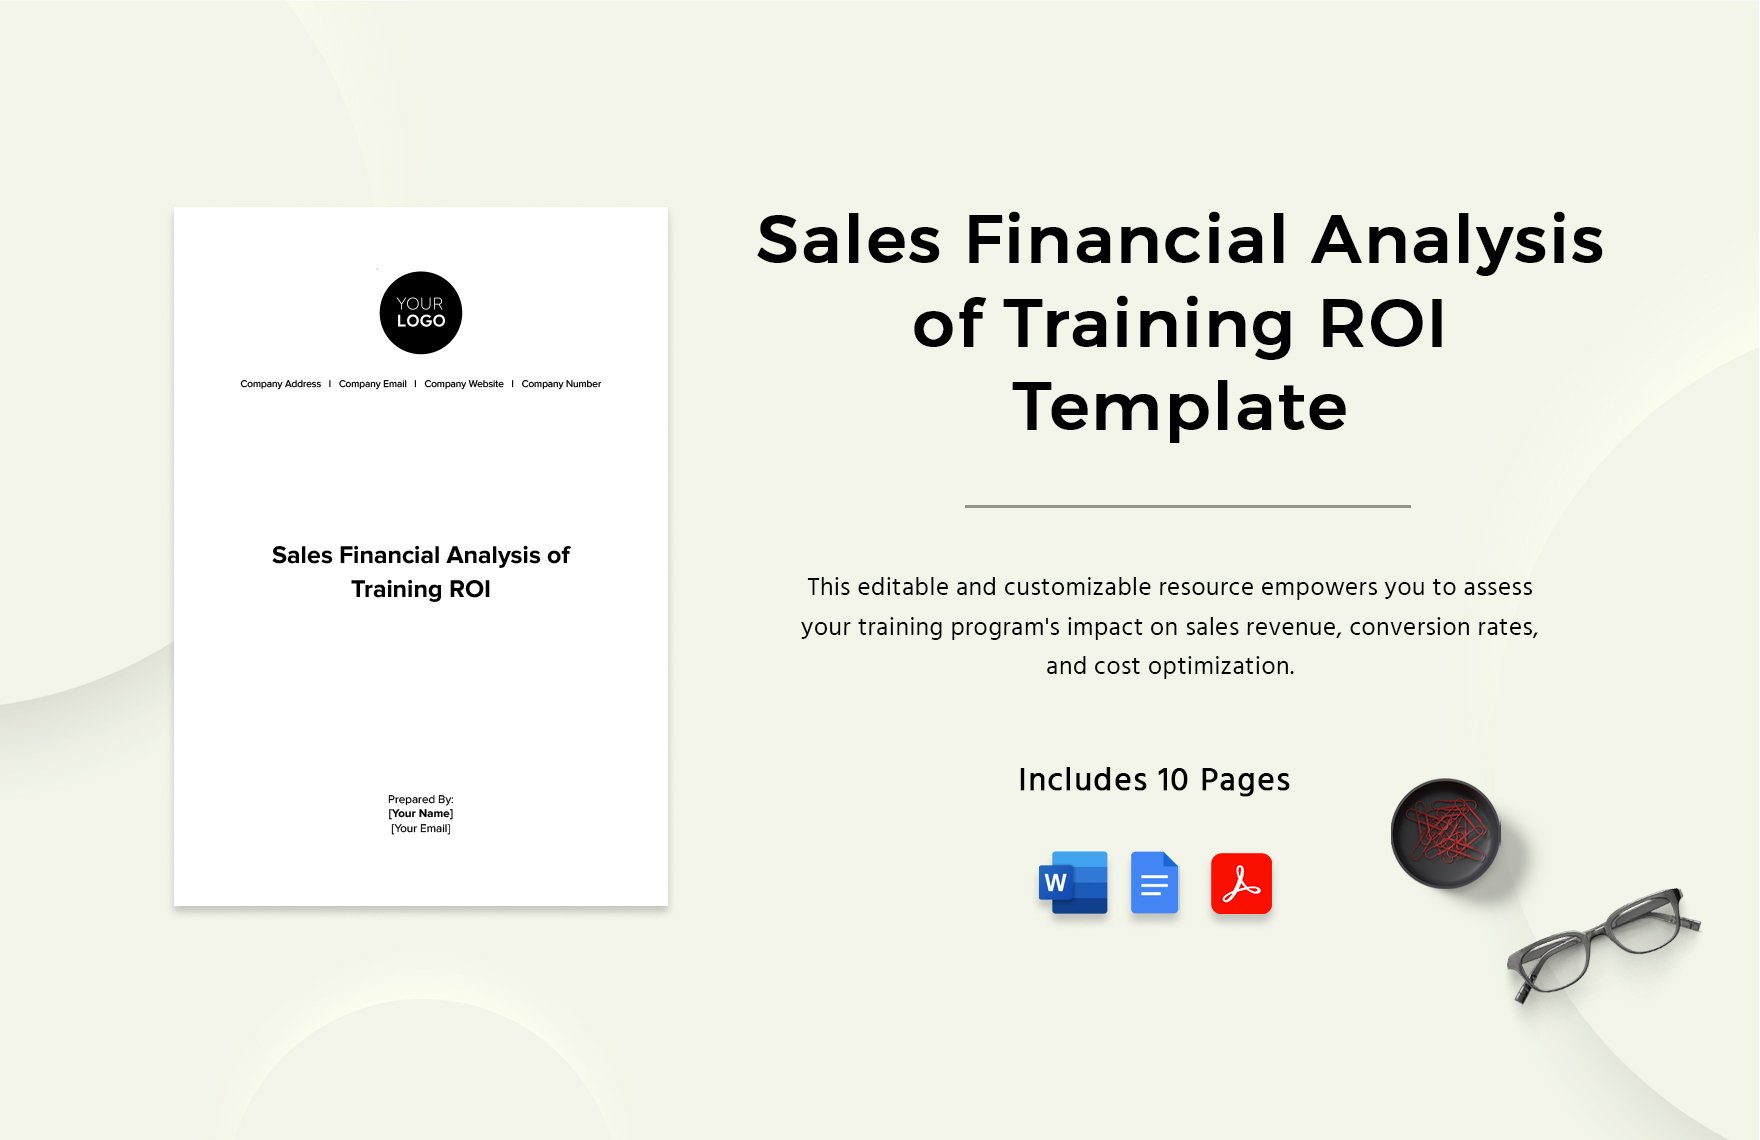 Sales Financial Analysis of Training ROI Template